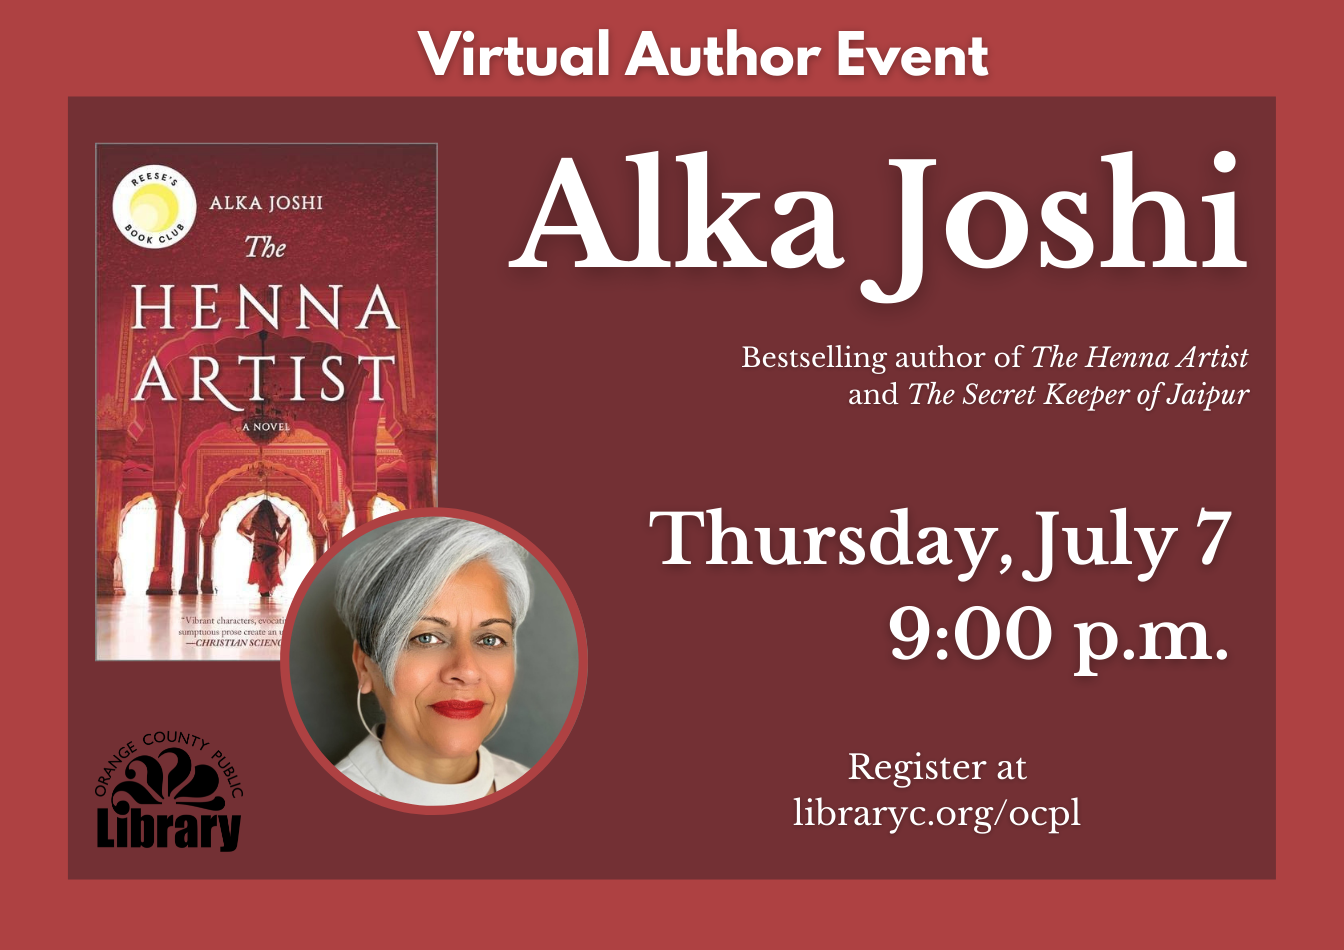 Widget for a virtual author event with Alka Joshi